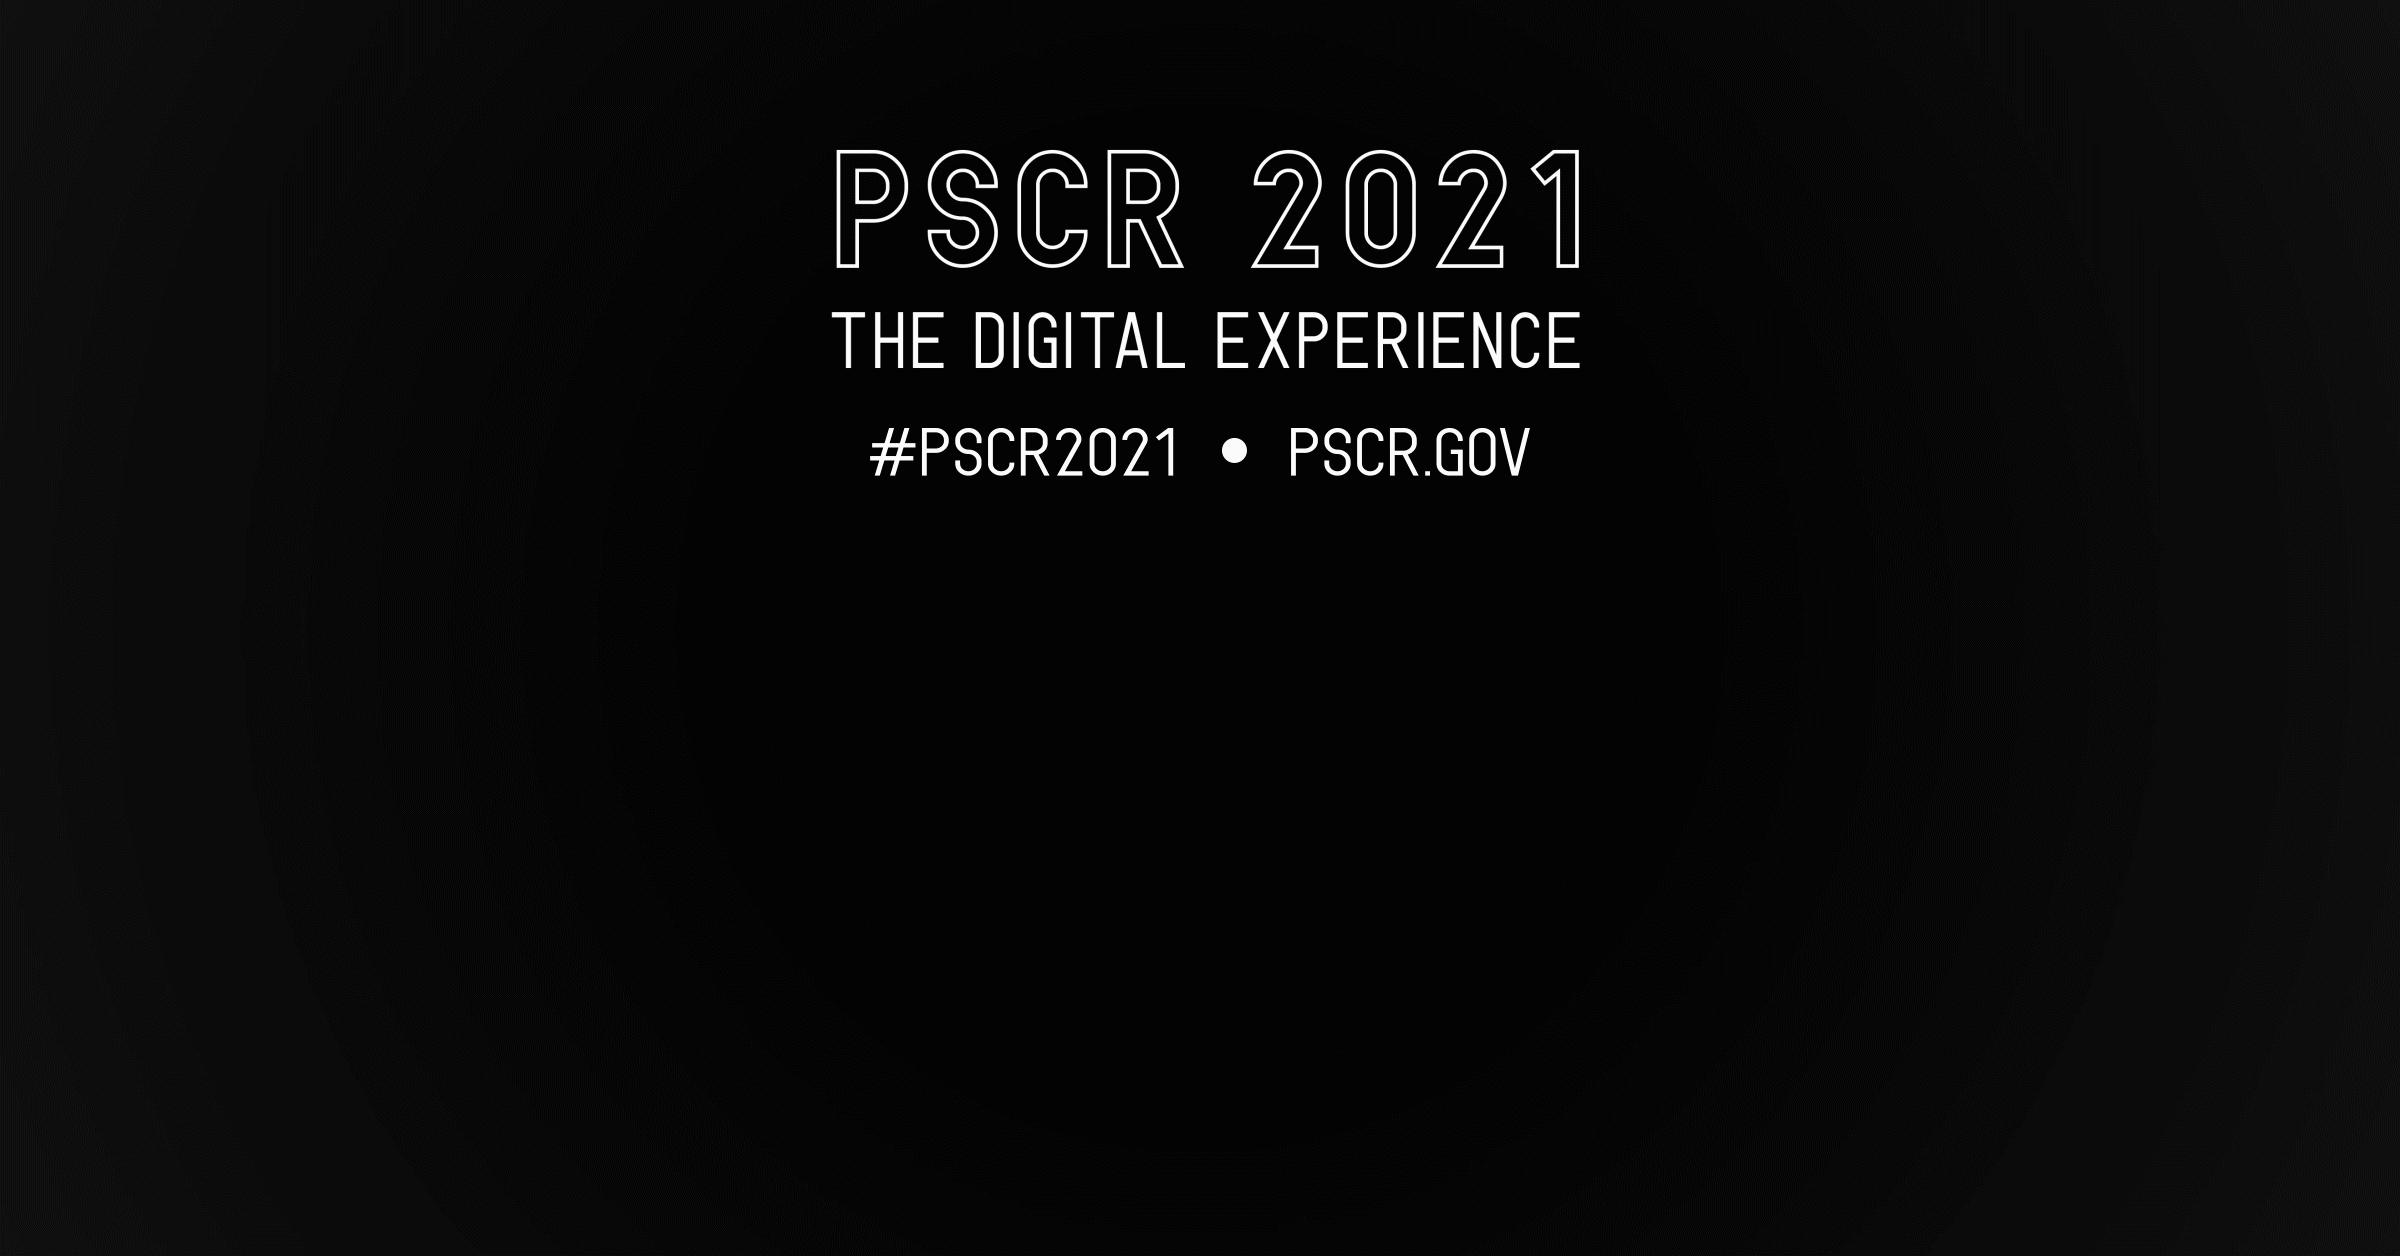 Infographic Gif - PSCR 2021 will feature plenary sessions, tech demos, on-demand sessions, and live Q&A